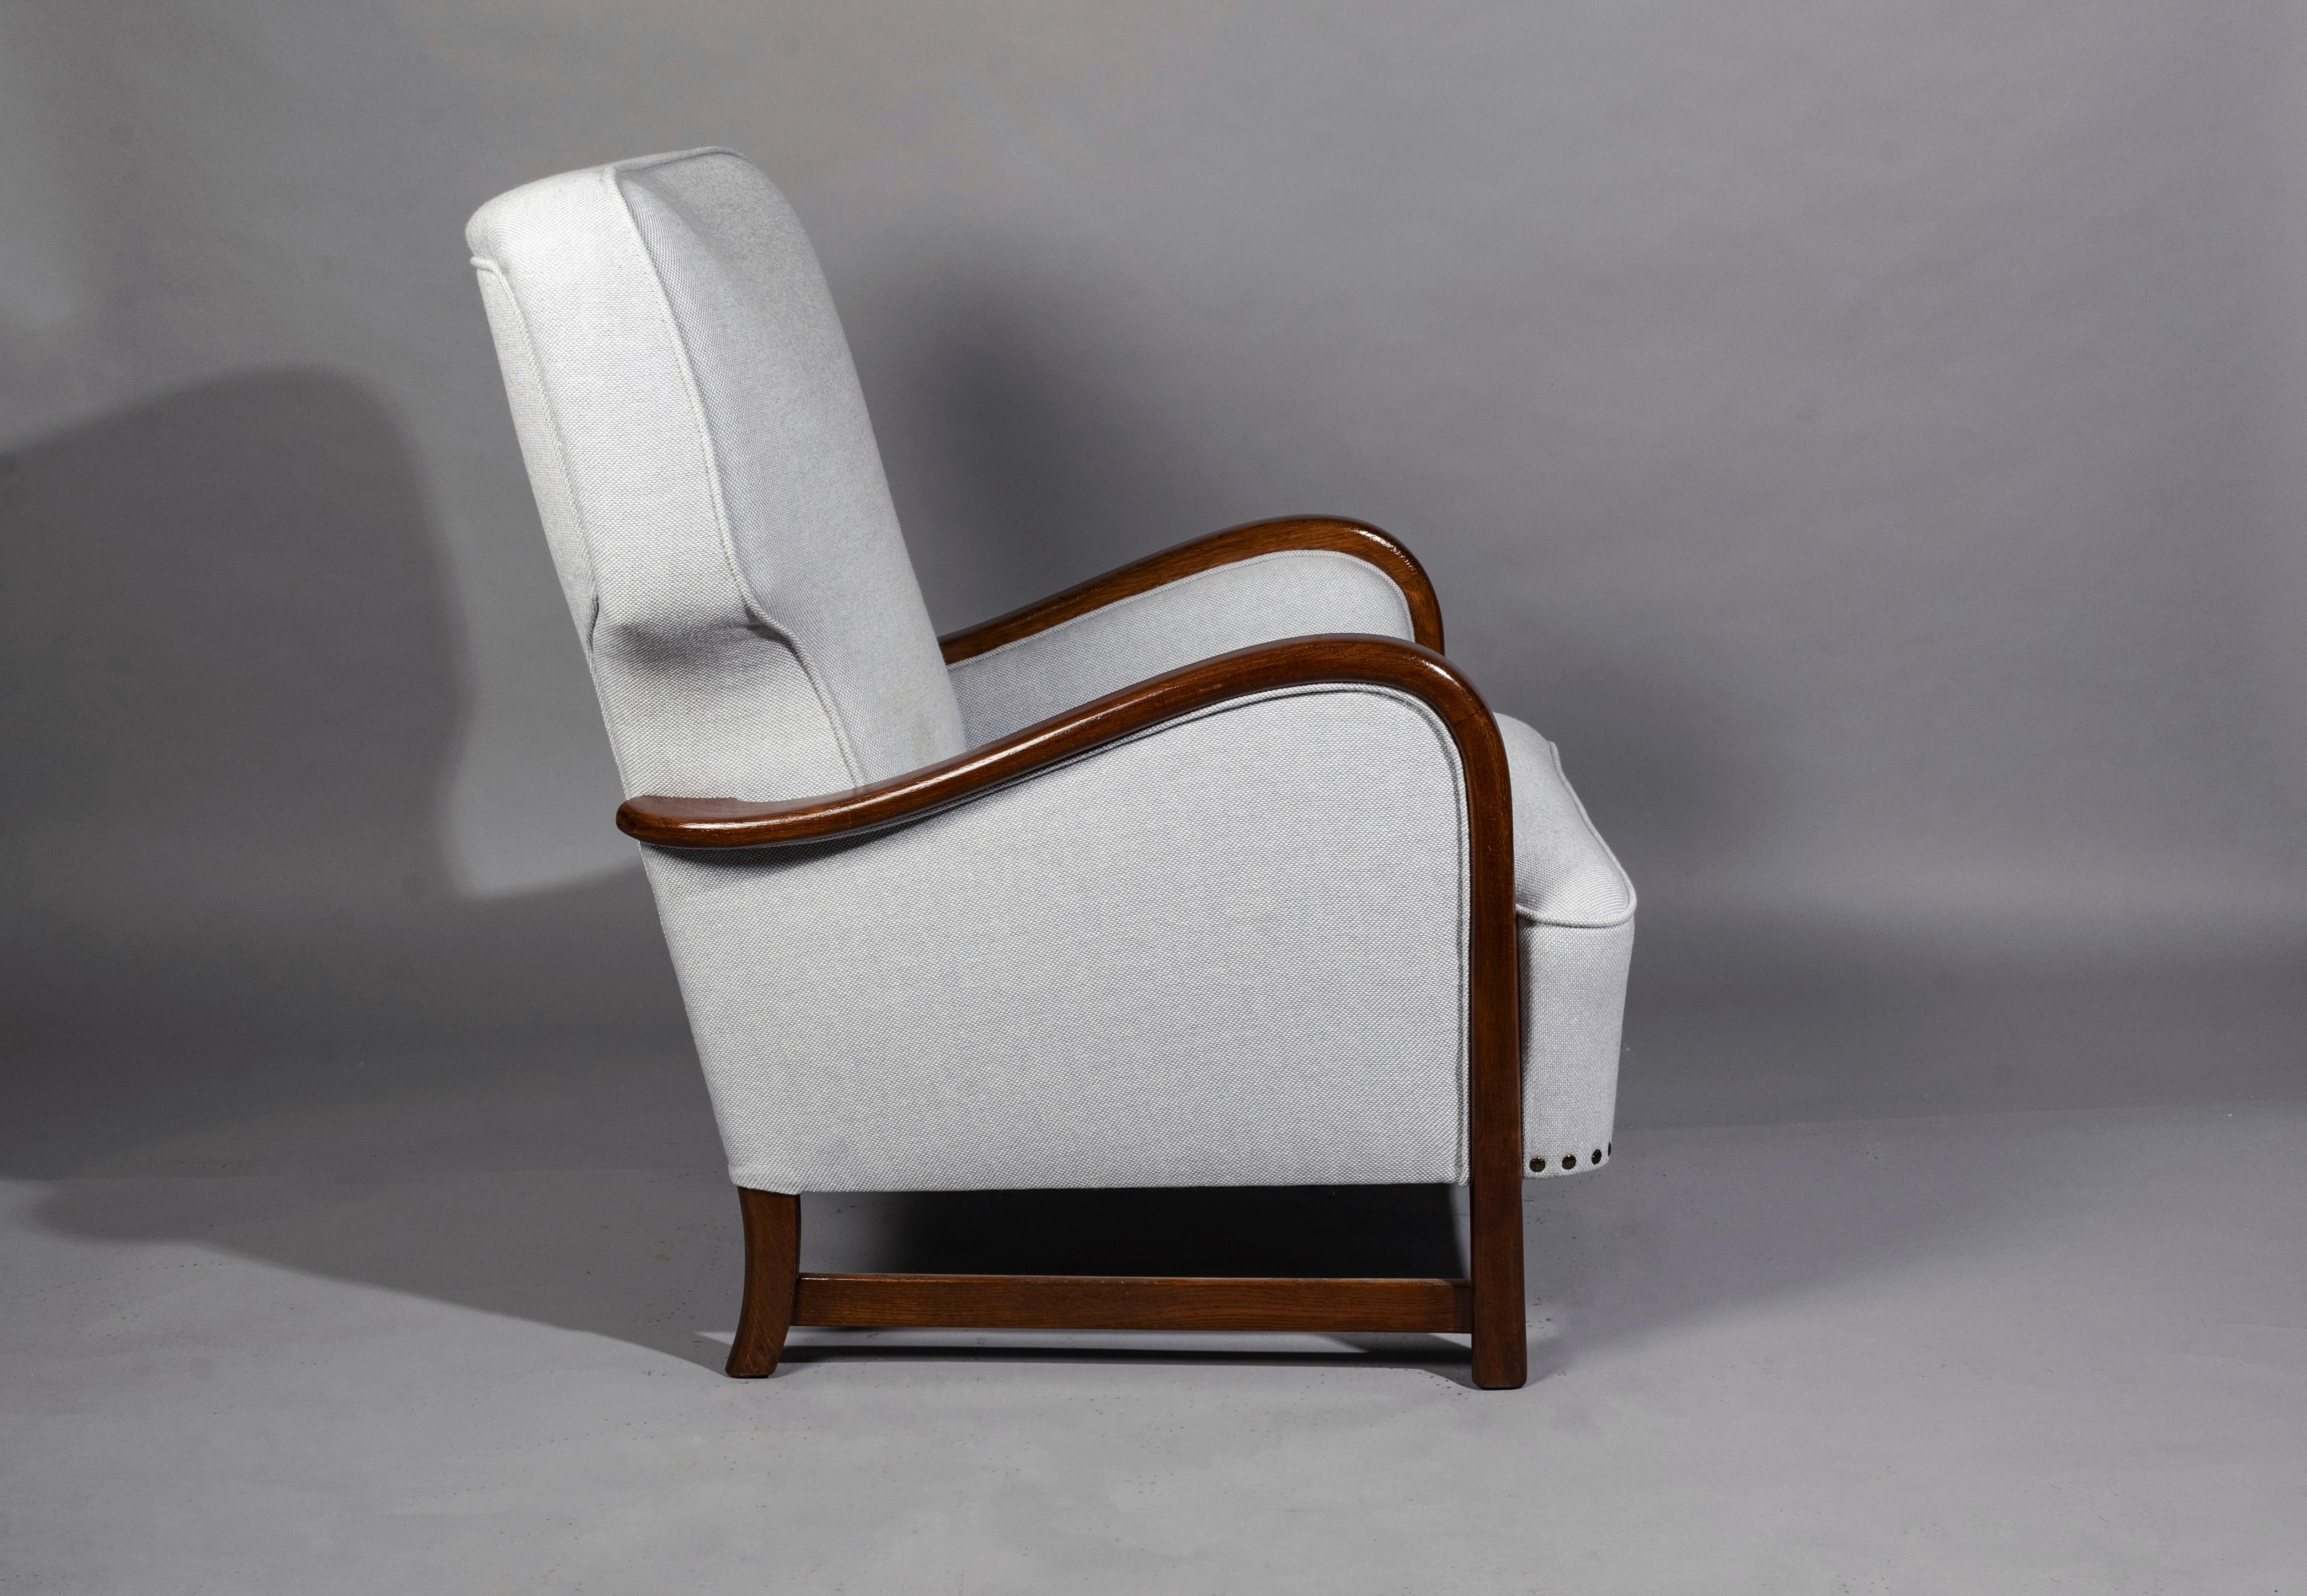 Danish Sculptural Wingback Chair, Denmark, 1940s, Fabric by Kvadrat For Sale